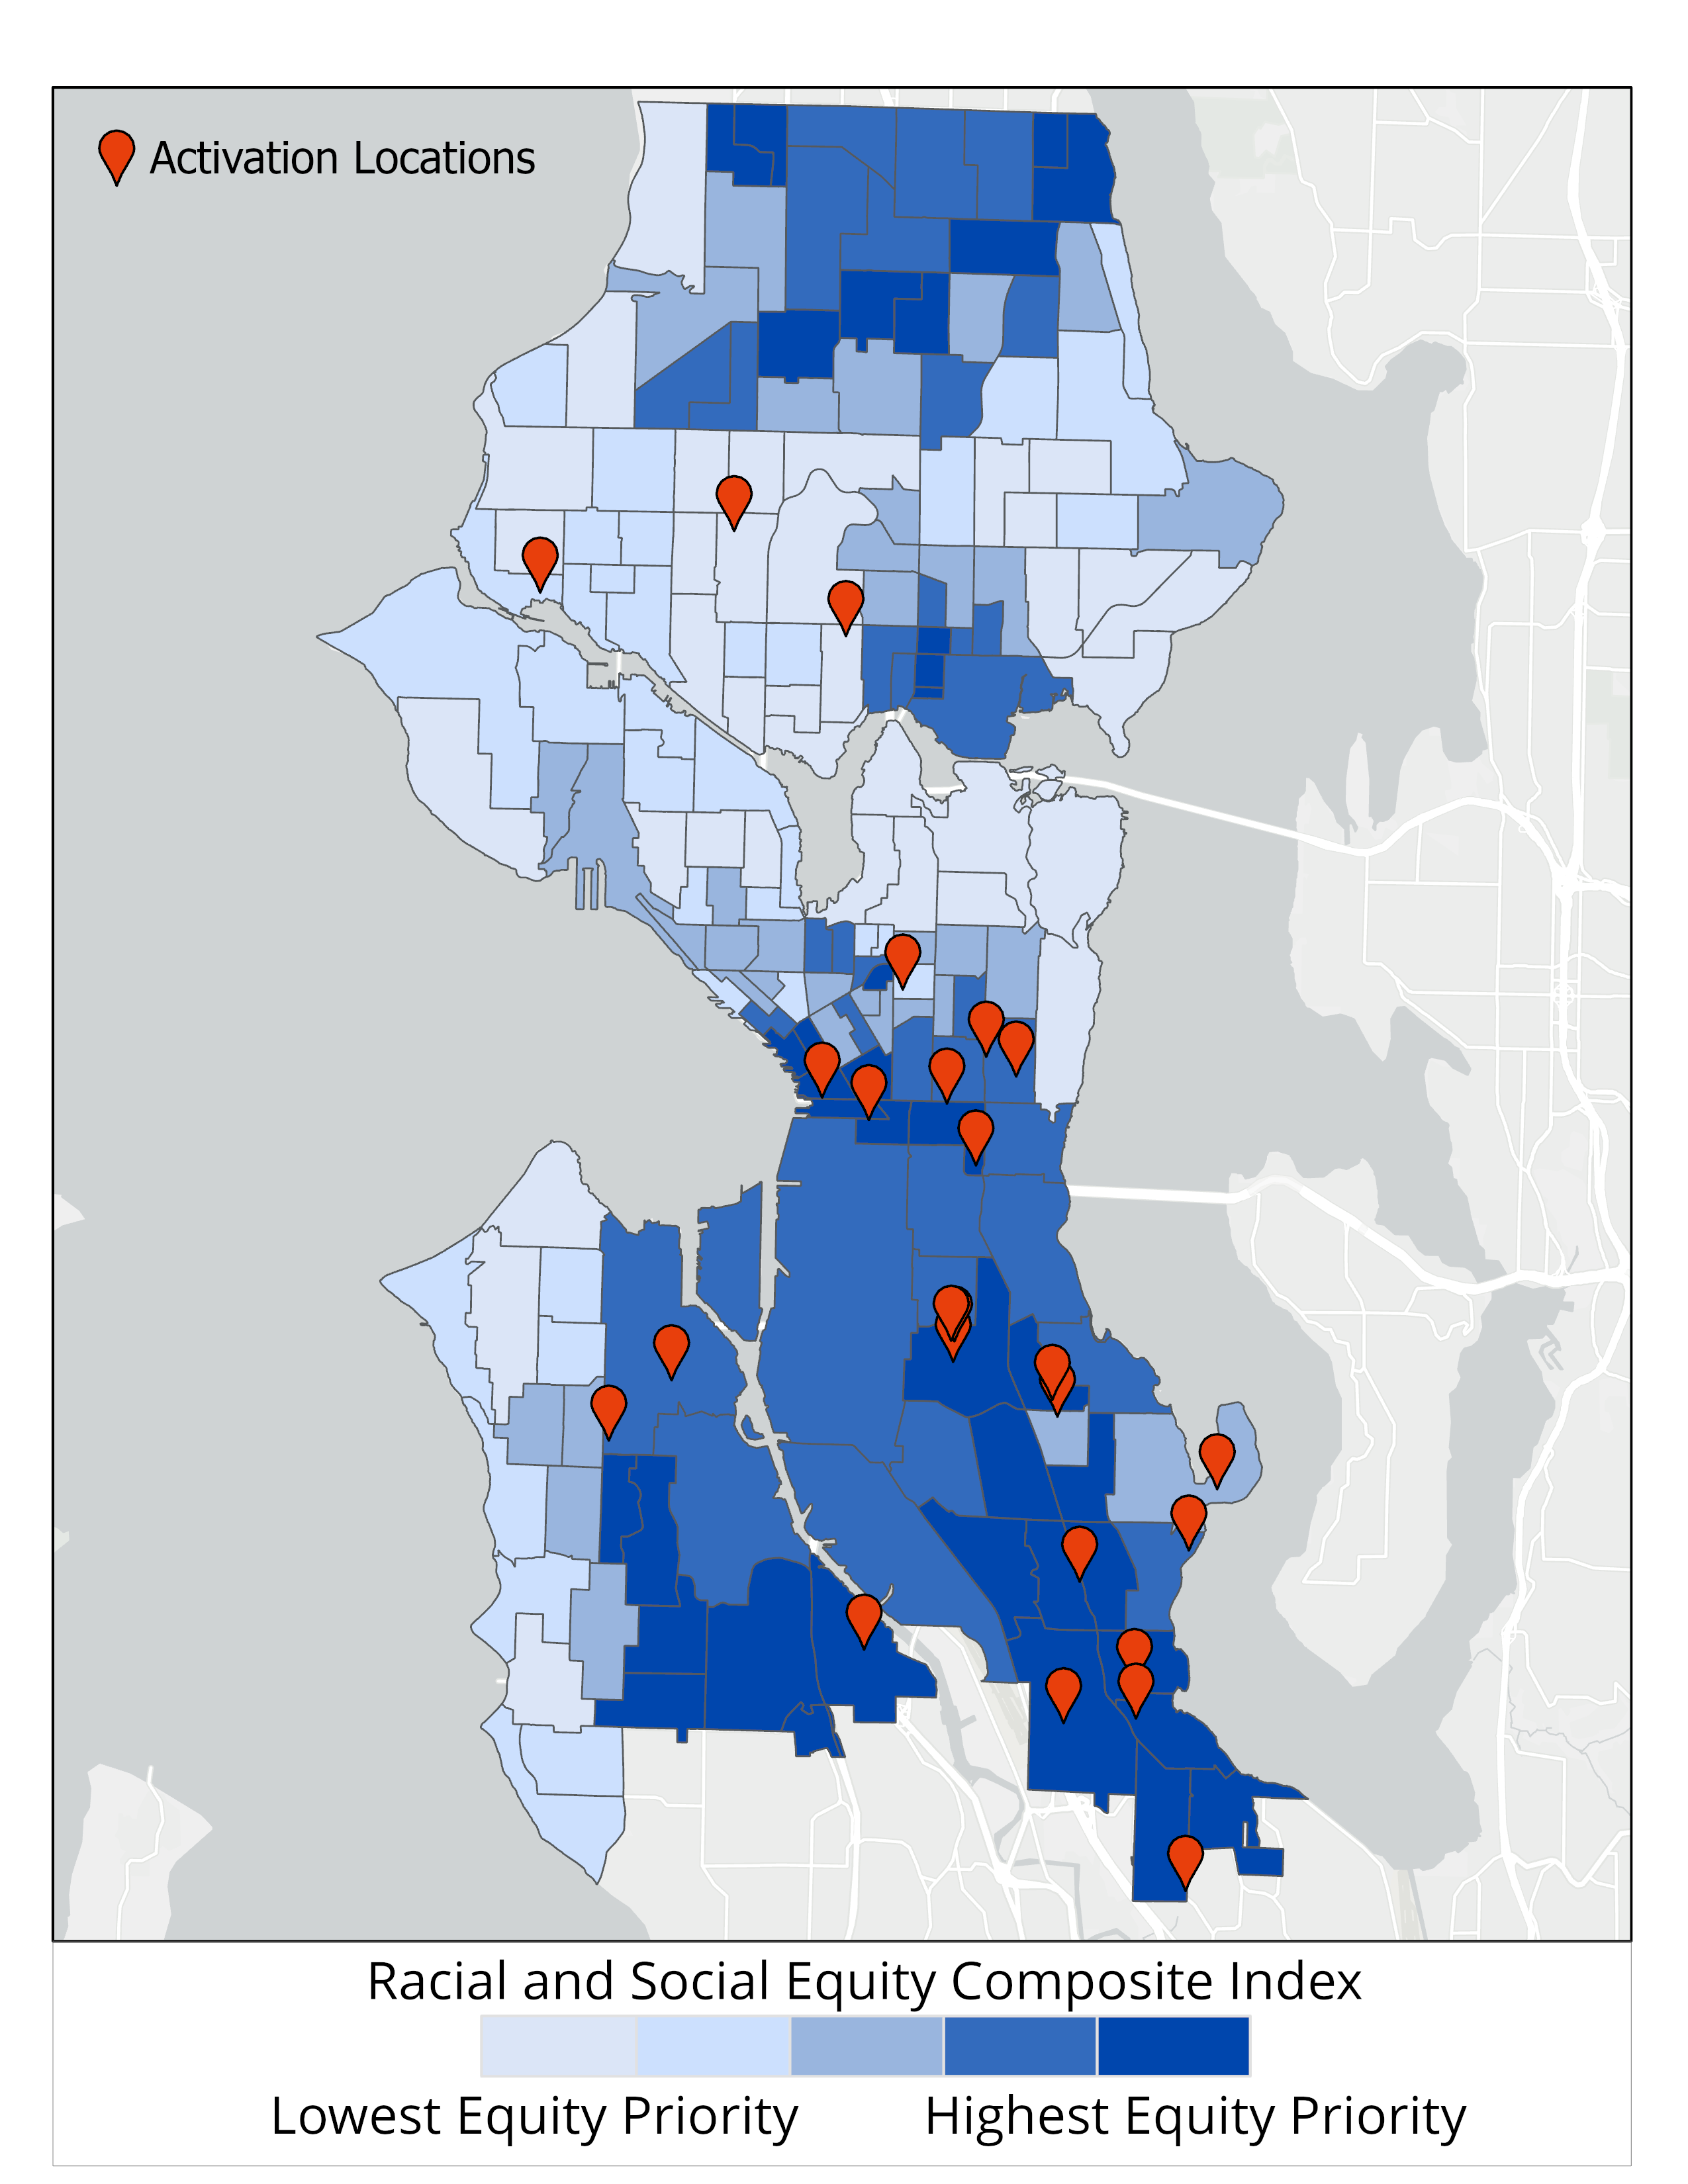 A map of Seattle showing high and low equity priority areas according to the Racial and Social Equity Composite Index. The map shows park activation locations. Most of them are in central and south Seattle, in higher equity priority areas. 